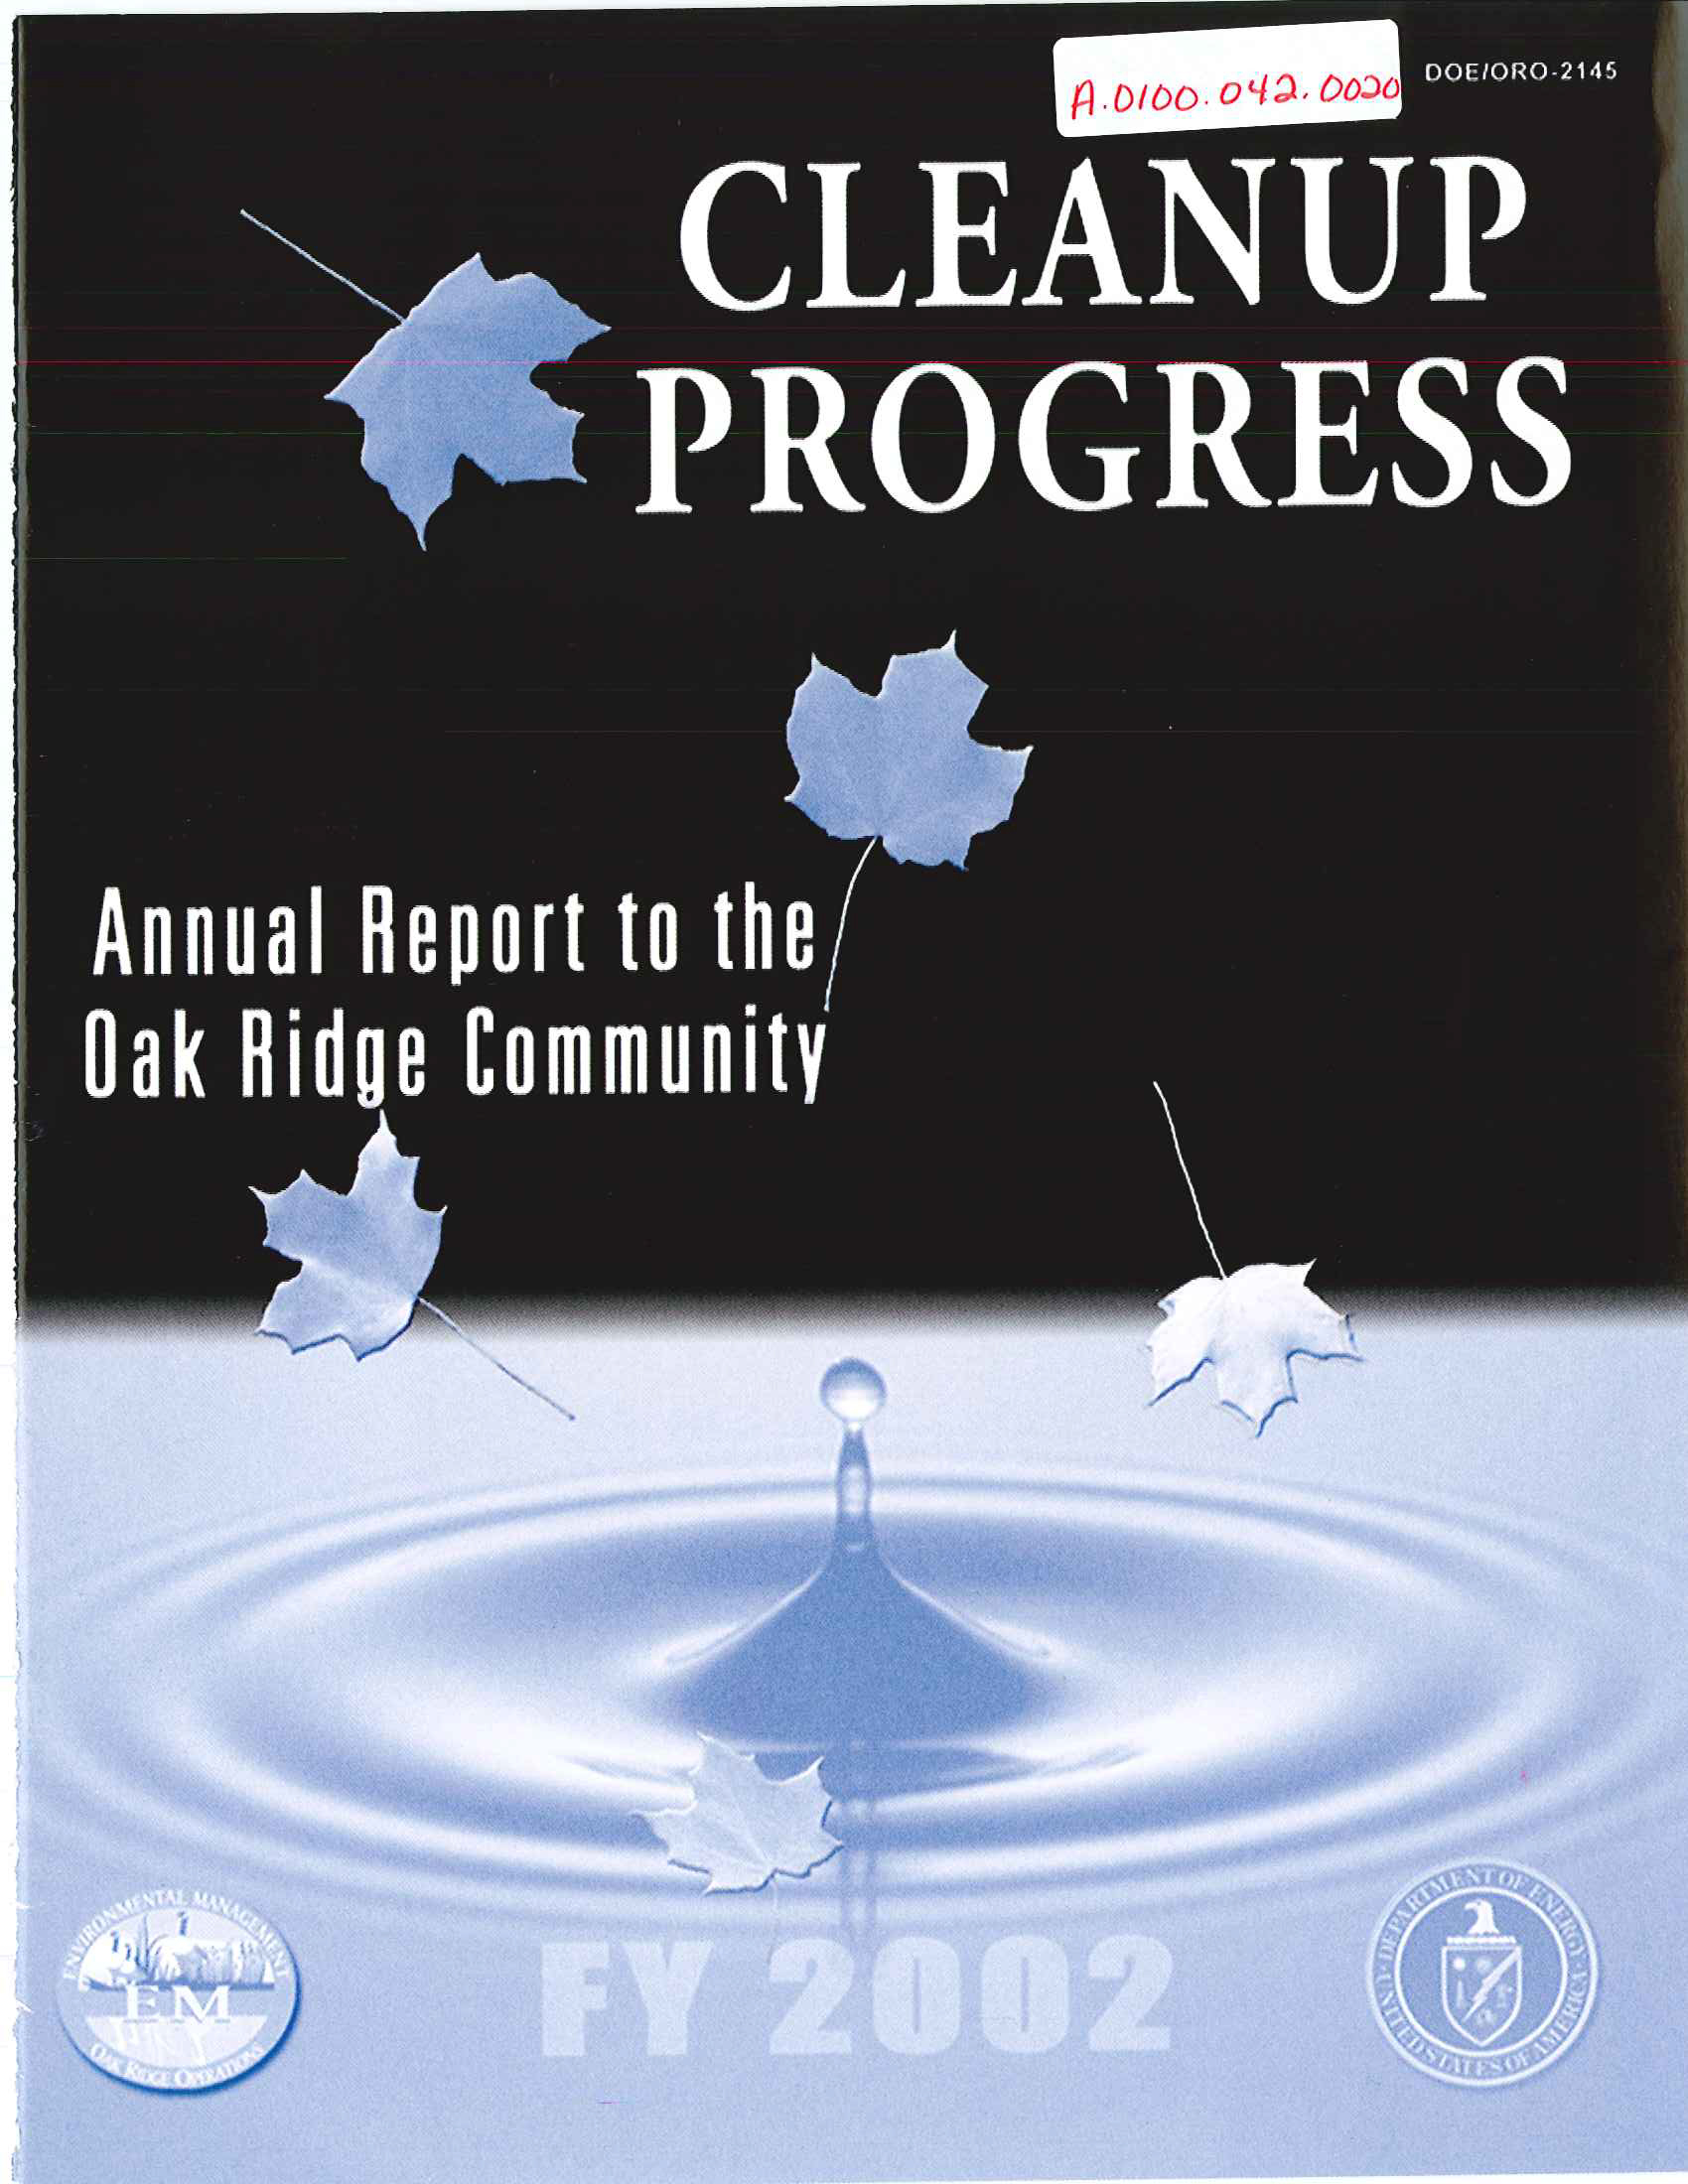 2002 Cleanup Progress cover